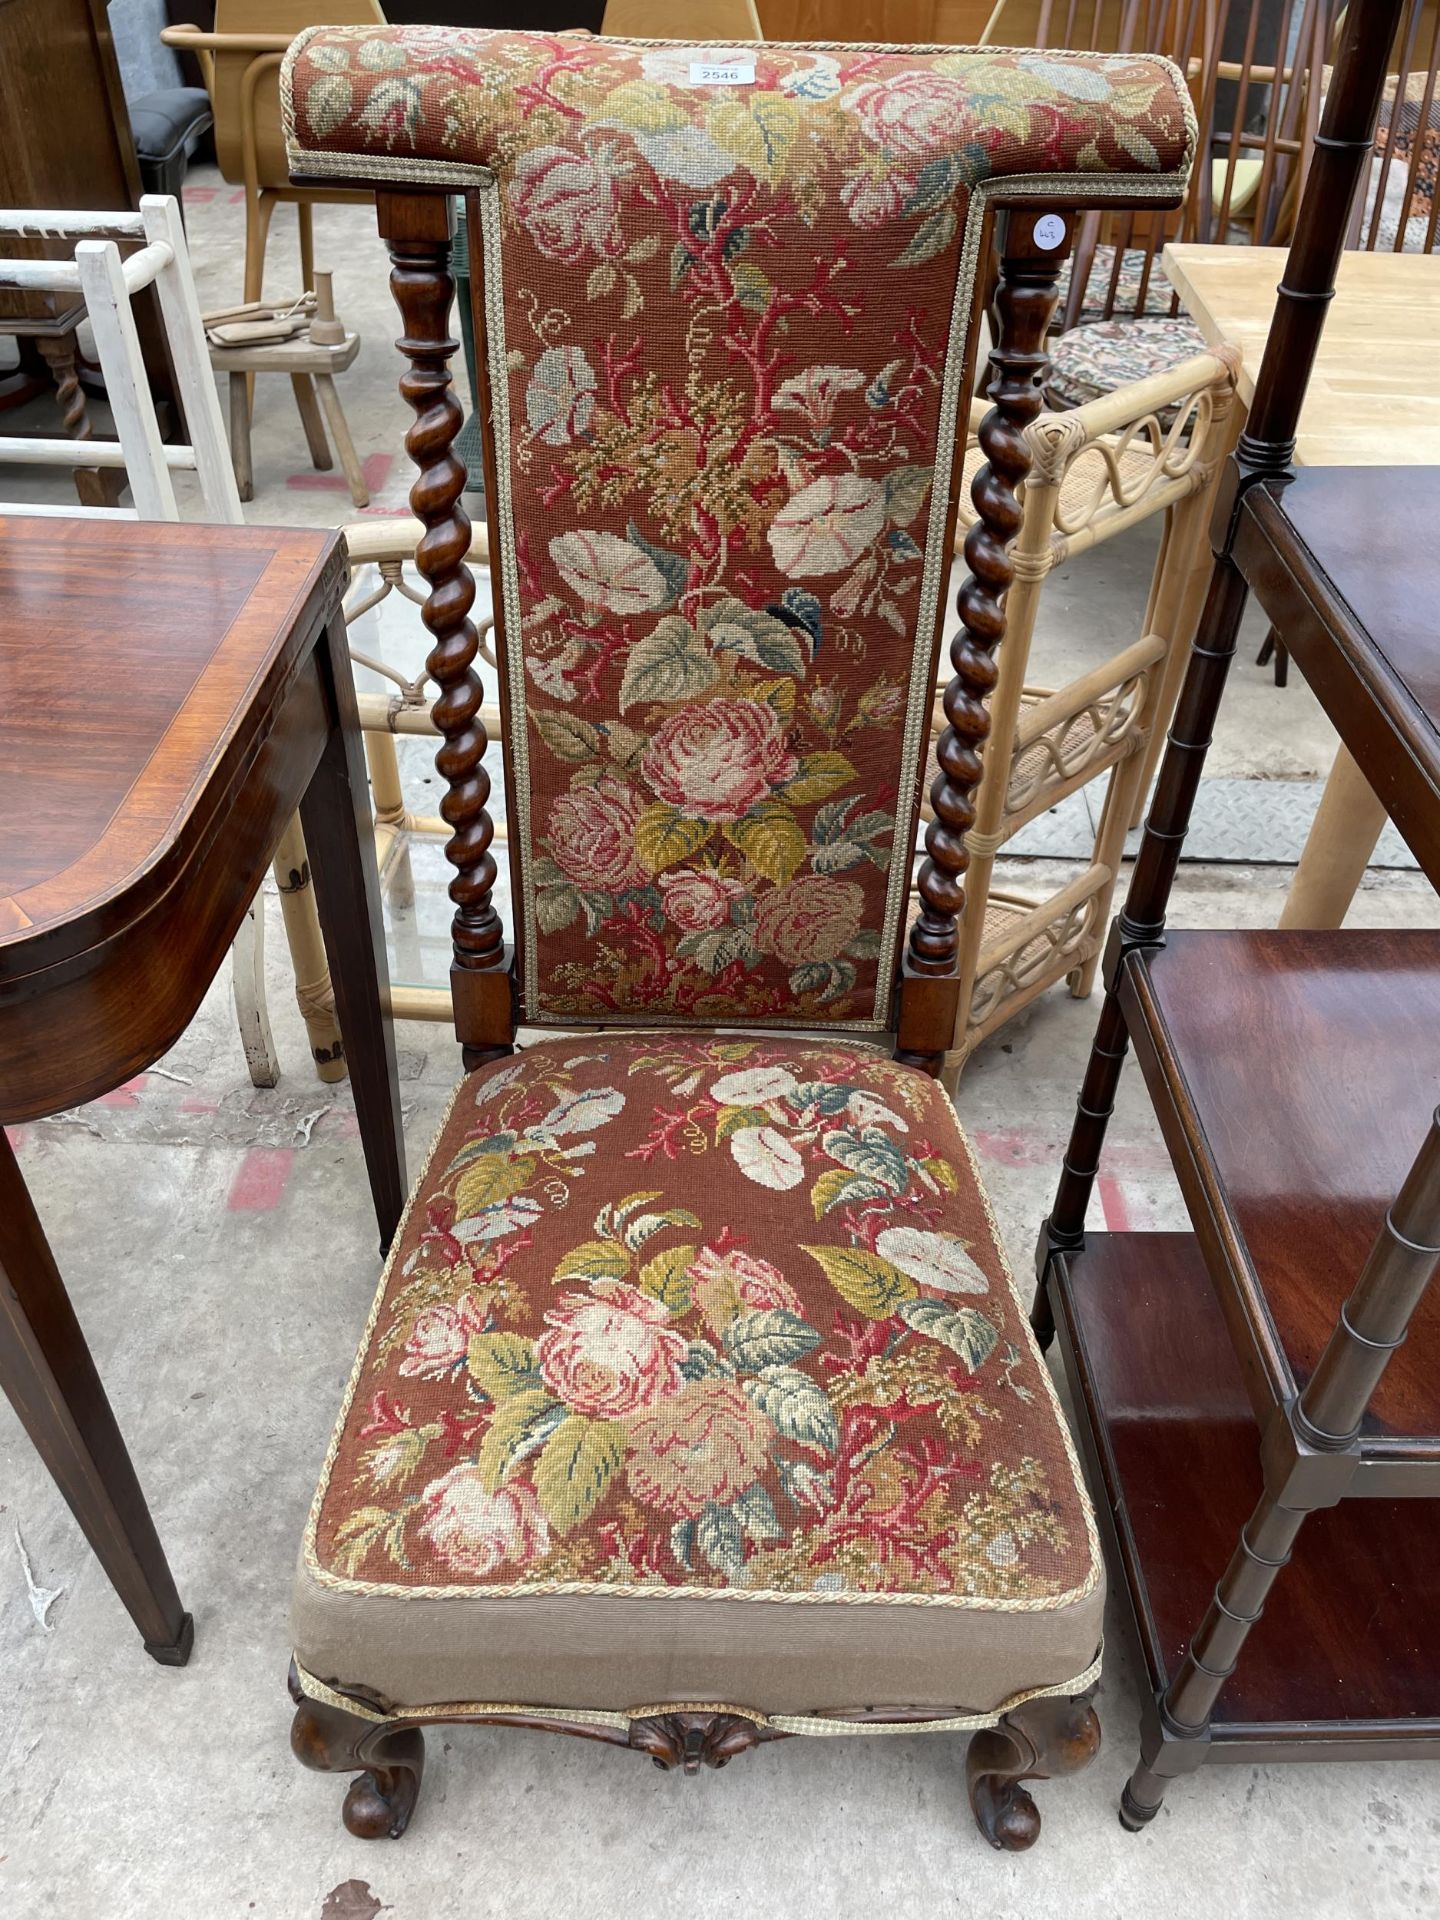 A VICTORIAN MAHOGANY PRIE DEU CHAIR WITH BARLEY TWIST UPRIGHTS AND WOOLWORK SEAT AND BACKS